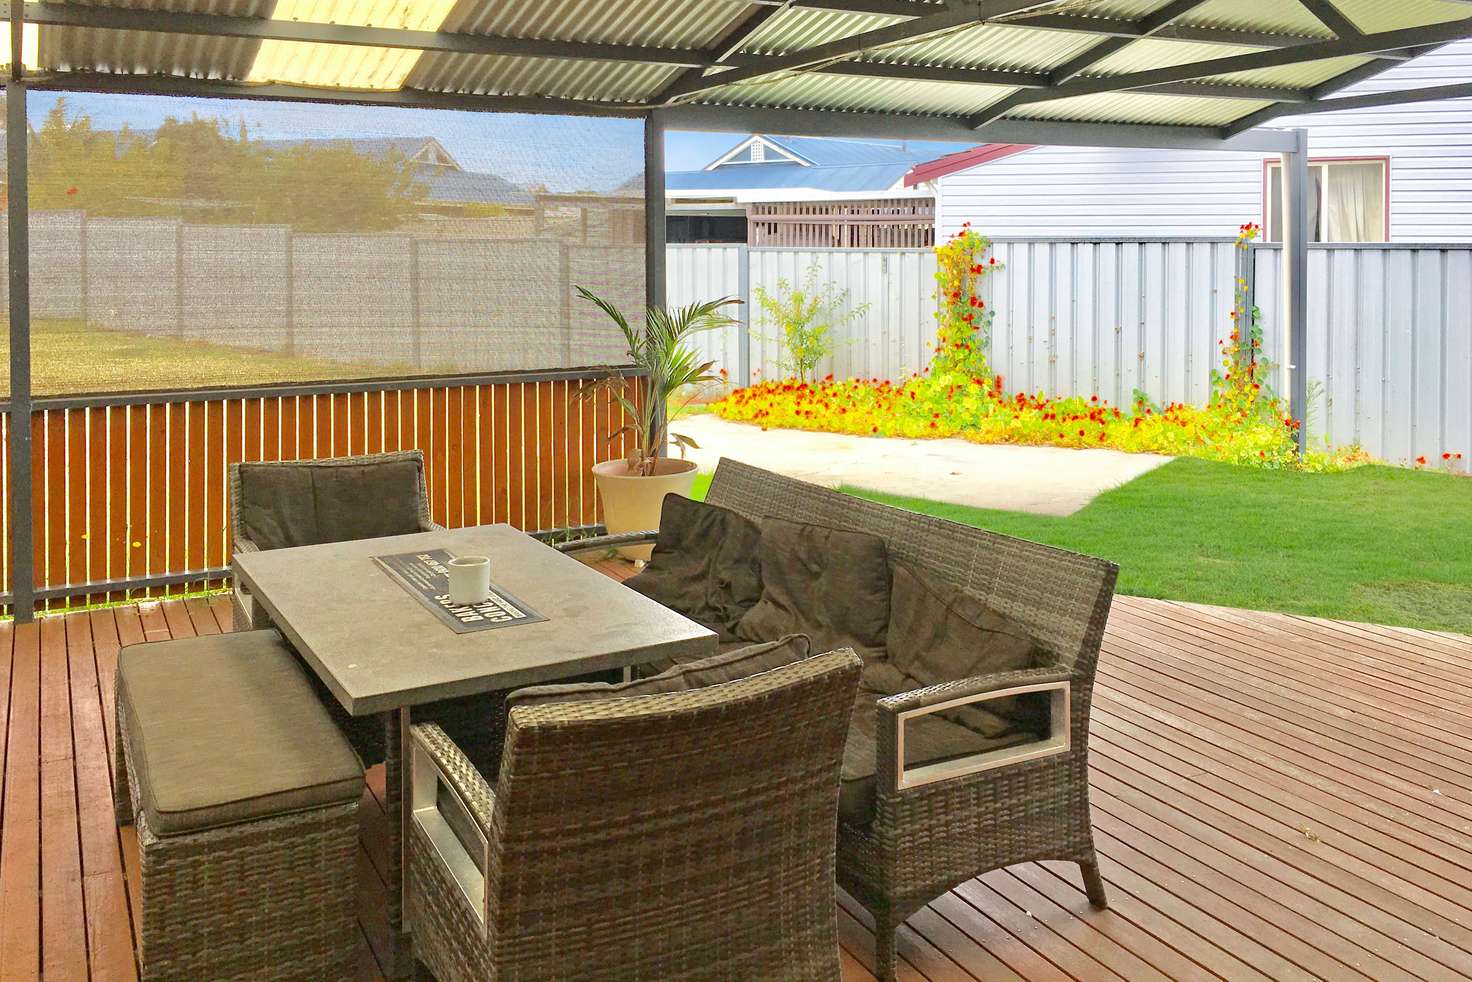 Main view of Homely house listing, 26 Parker Street, Lockyer WA 6330